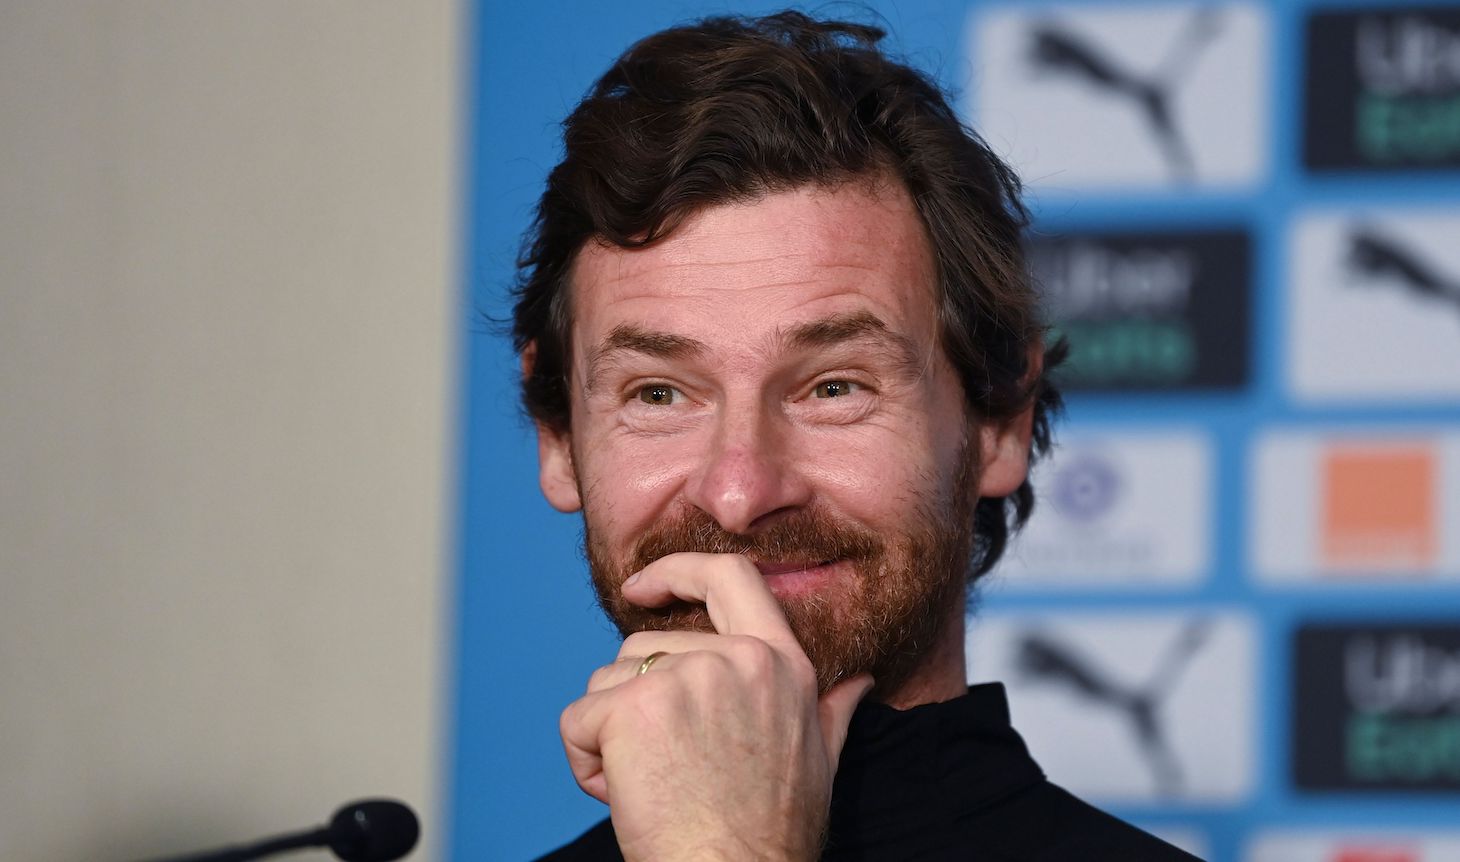 Olympique de Marseille's Portuguese coach Andre Villas Boas gives a press conference at the French L1 football club training camp in Marseille, southern France, on January 26, 2021. (Photo by Christophe SIMON / AFP) (Photo by CHRISTOPHE SIMON/AFP via Getty Images)